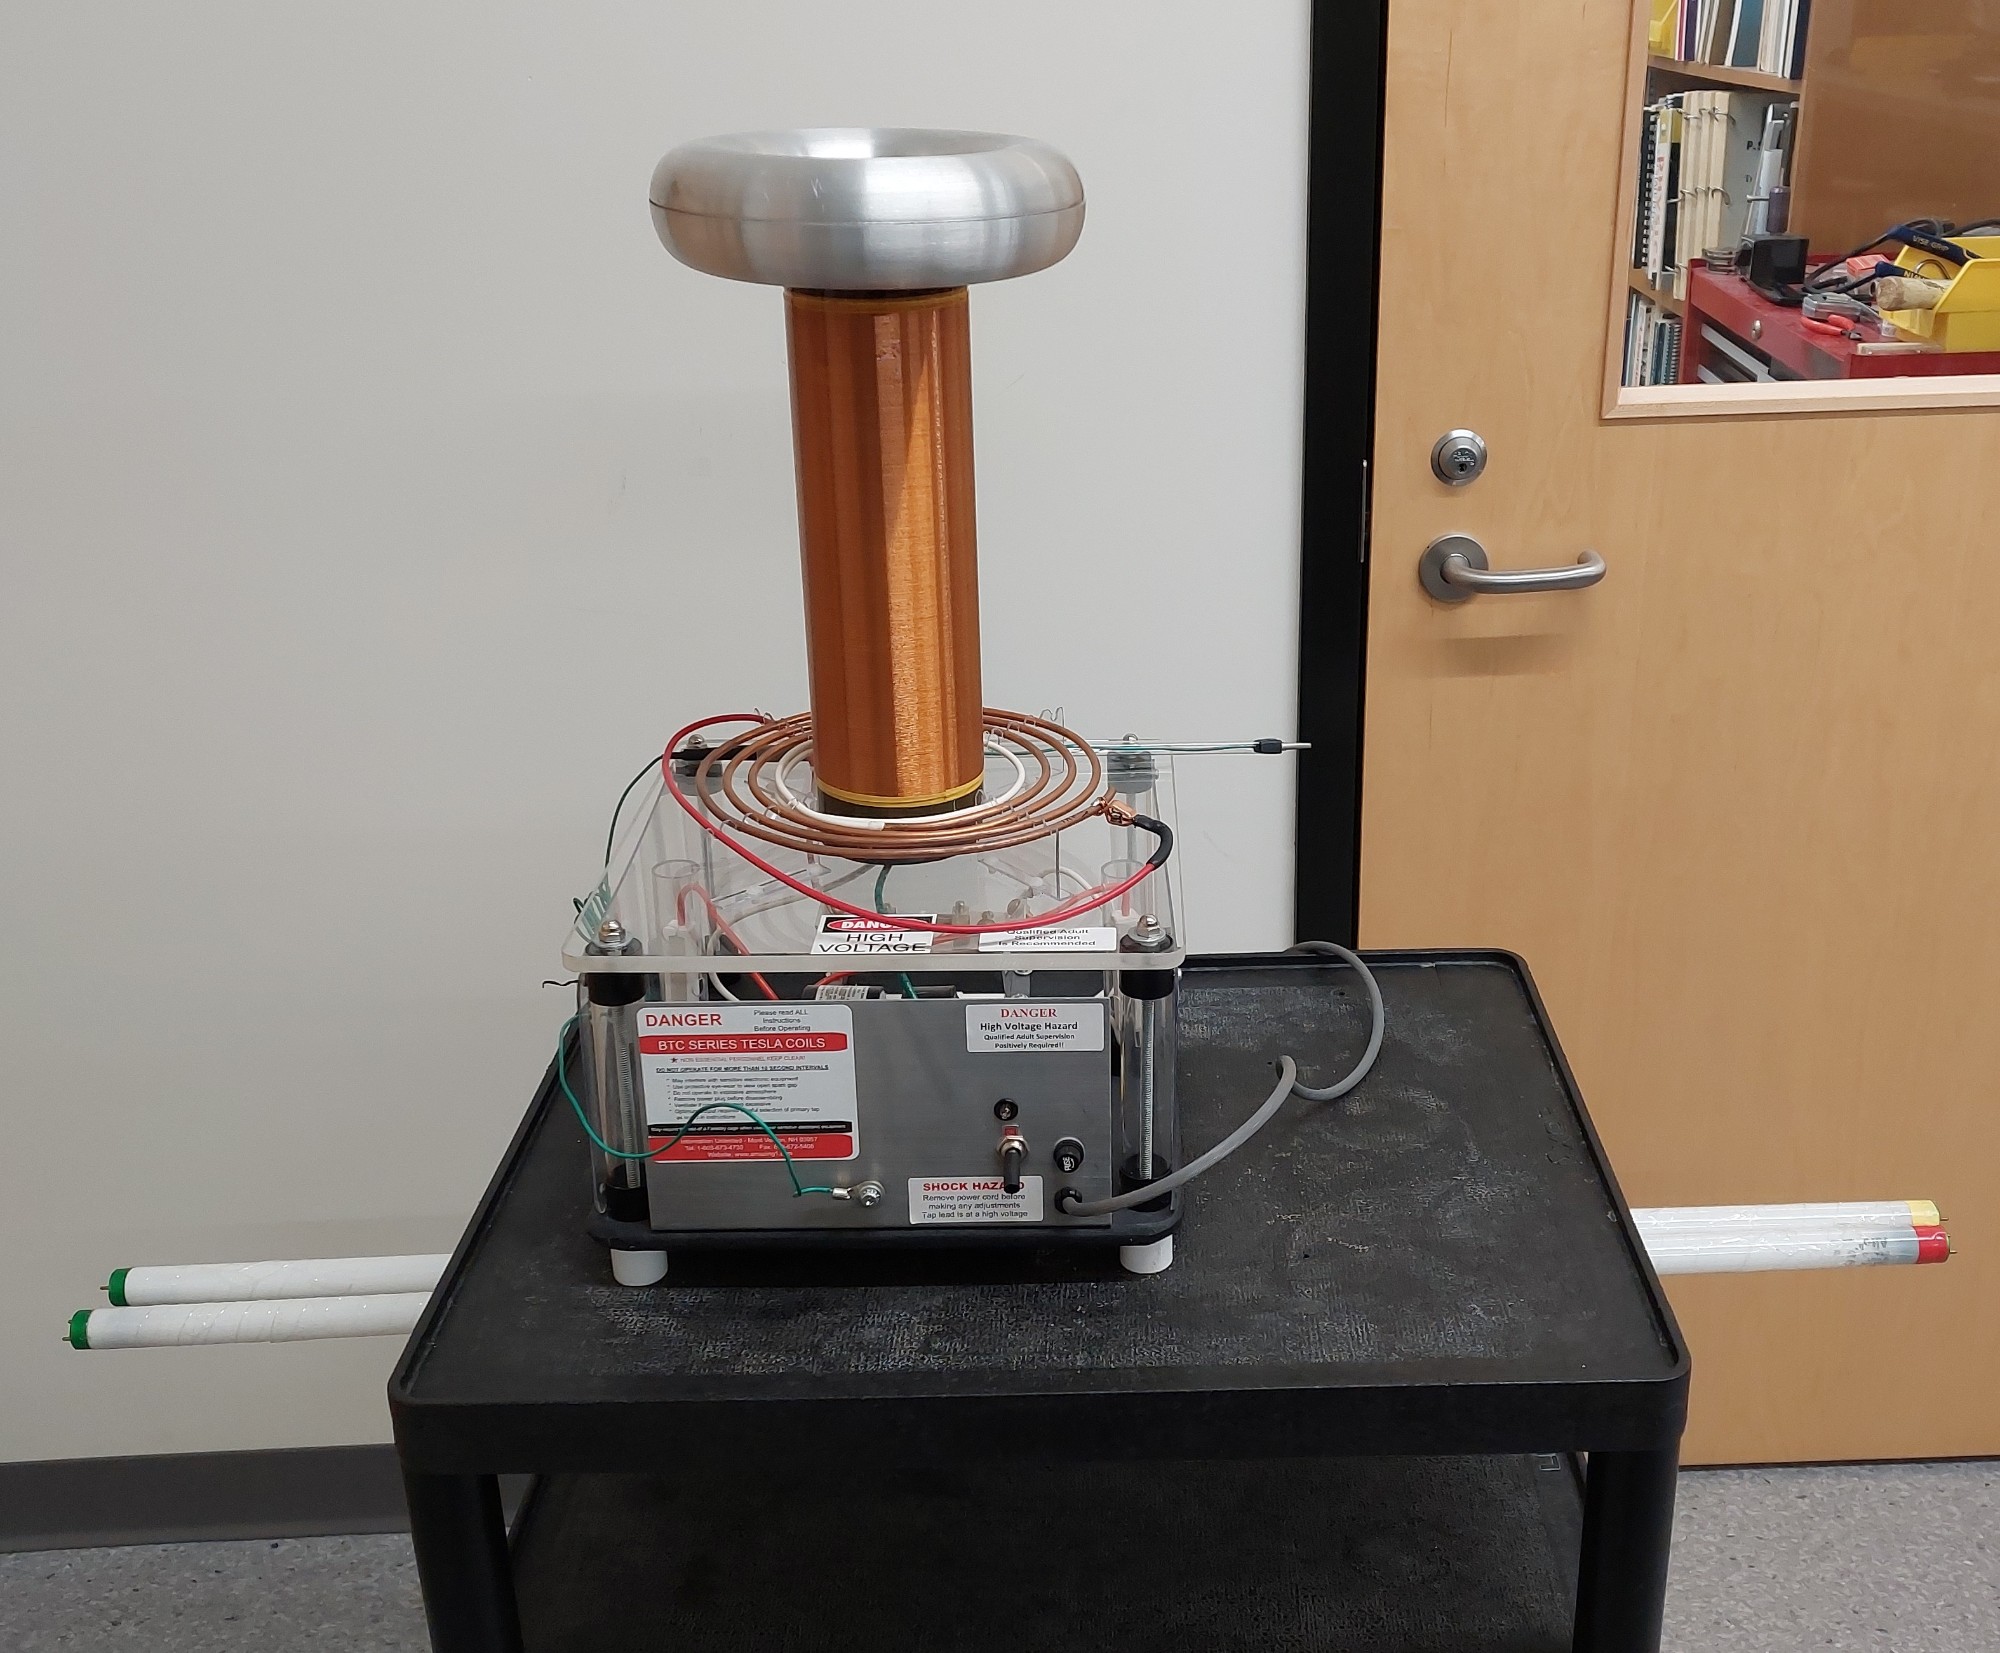 High Voltage! Put Safety First During Your Tesla Coil Performance